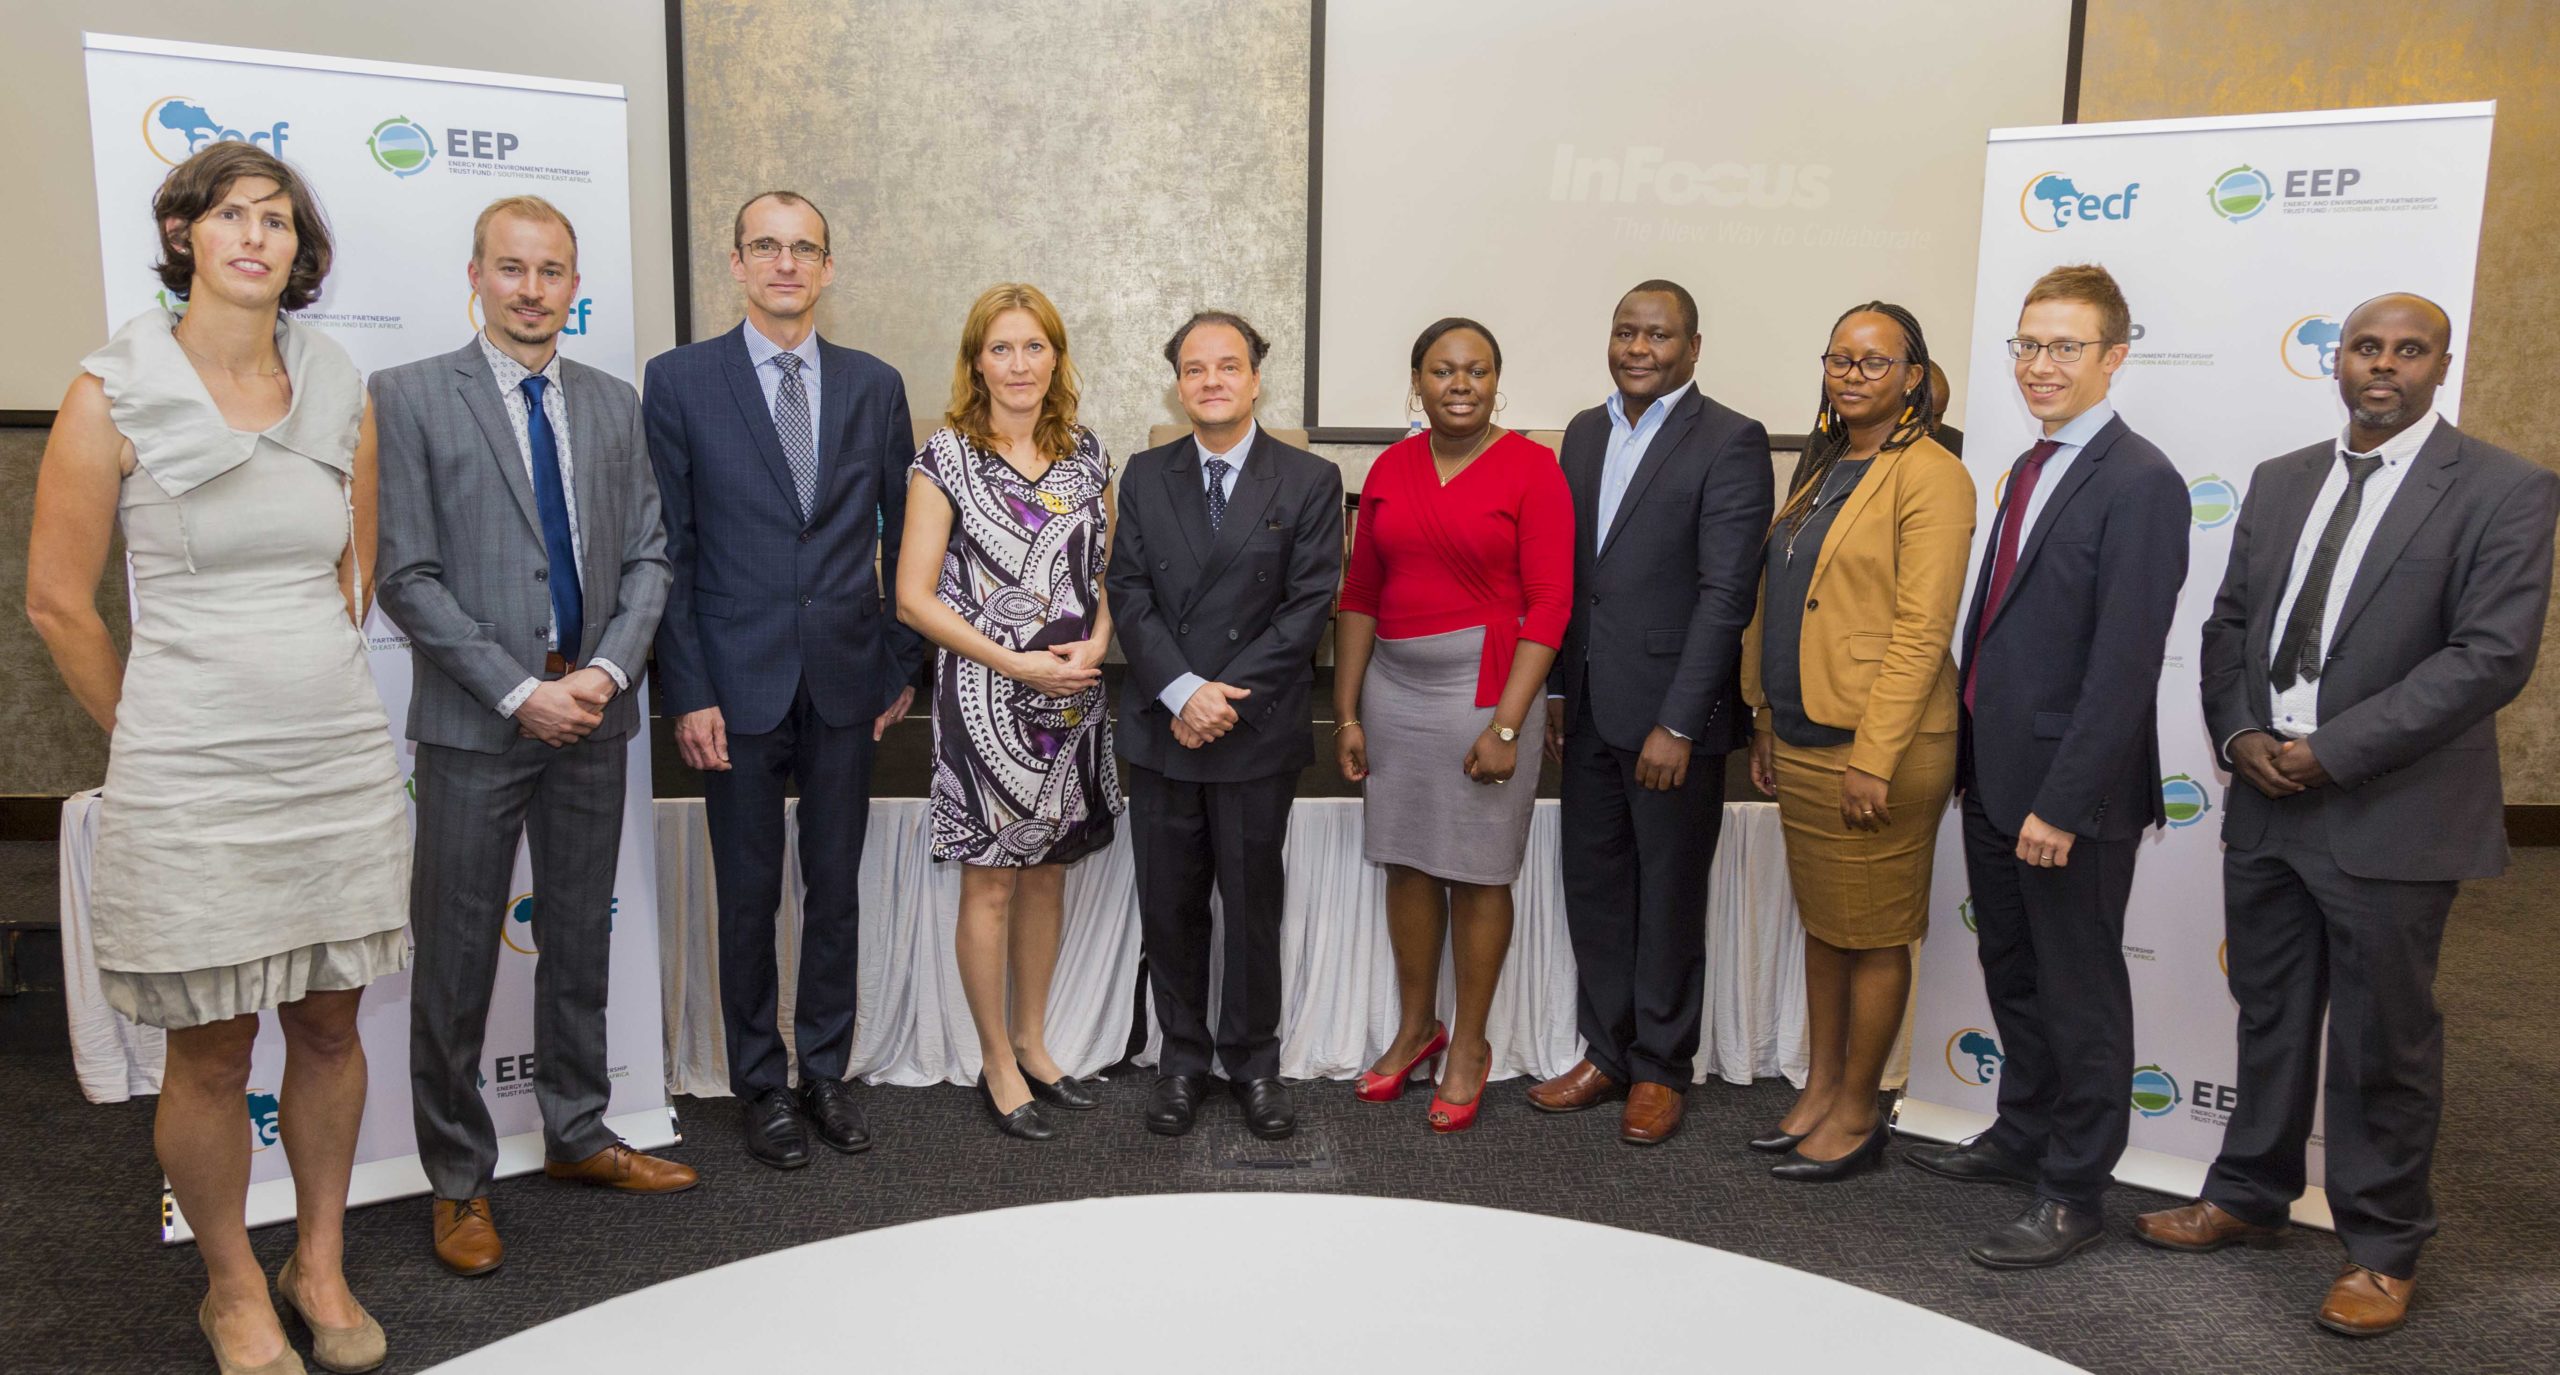 The AECF and EEP brings Renewable Energy investors from across the world to Africa